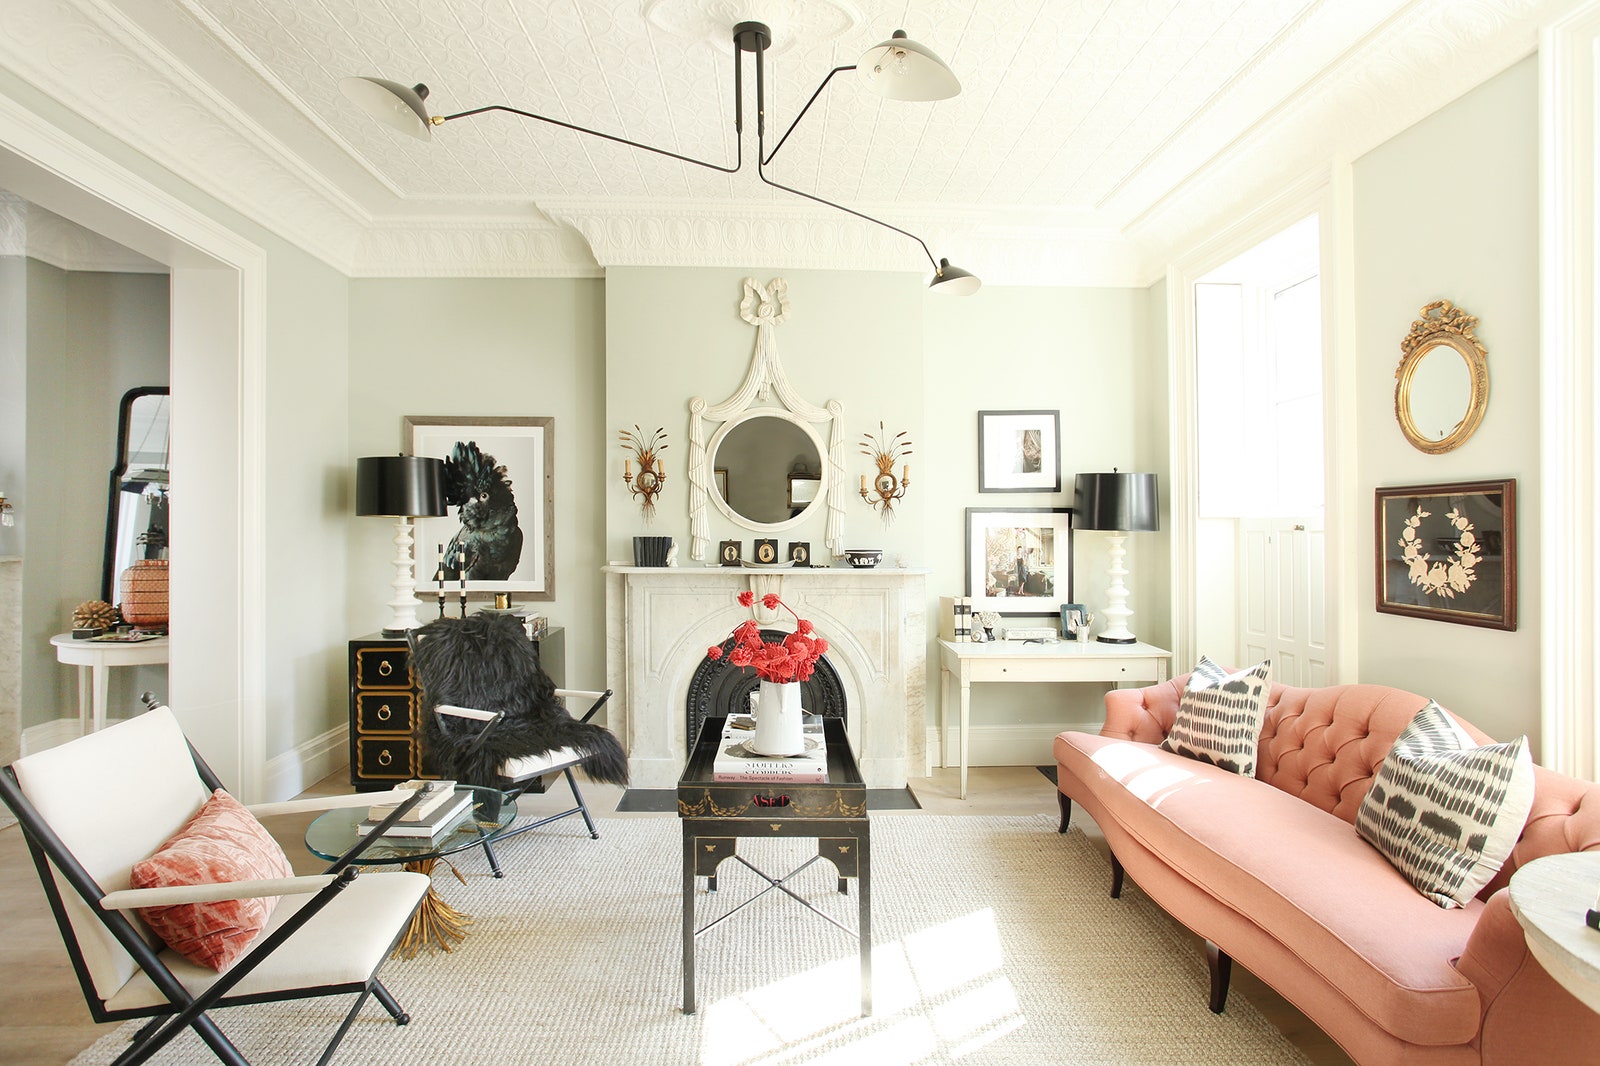 Décor Inspiration | At Home With: Interior Designer Jenny Wolf, Cobble Hill, Brooklyn